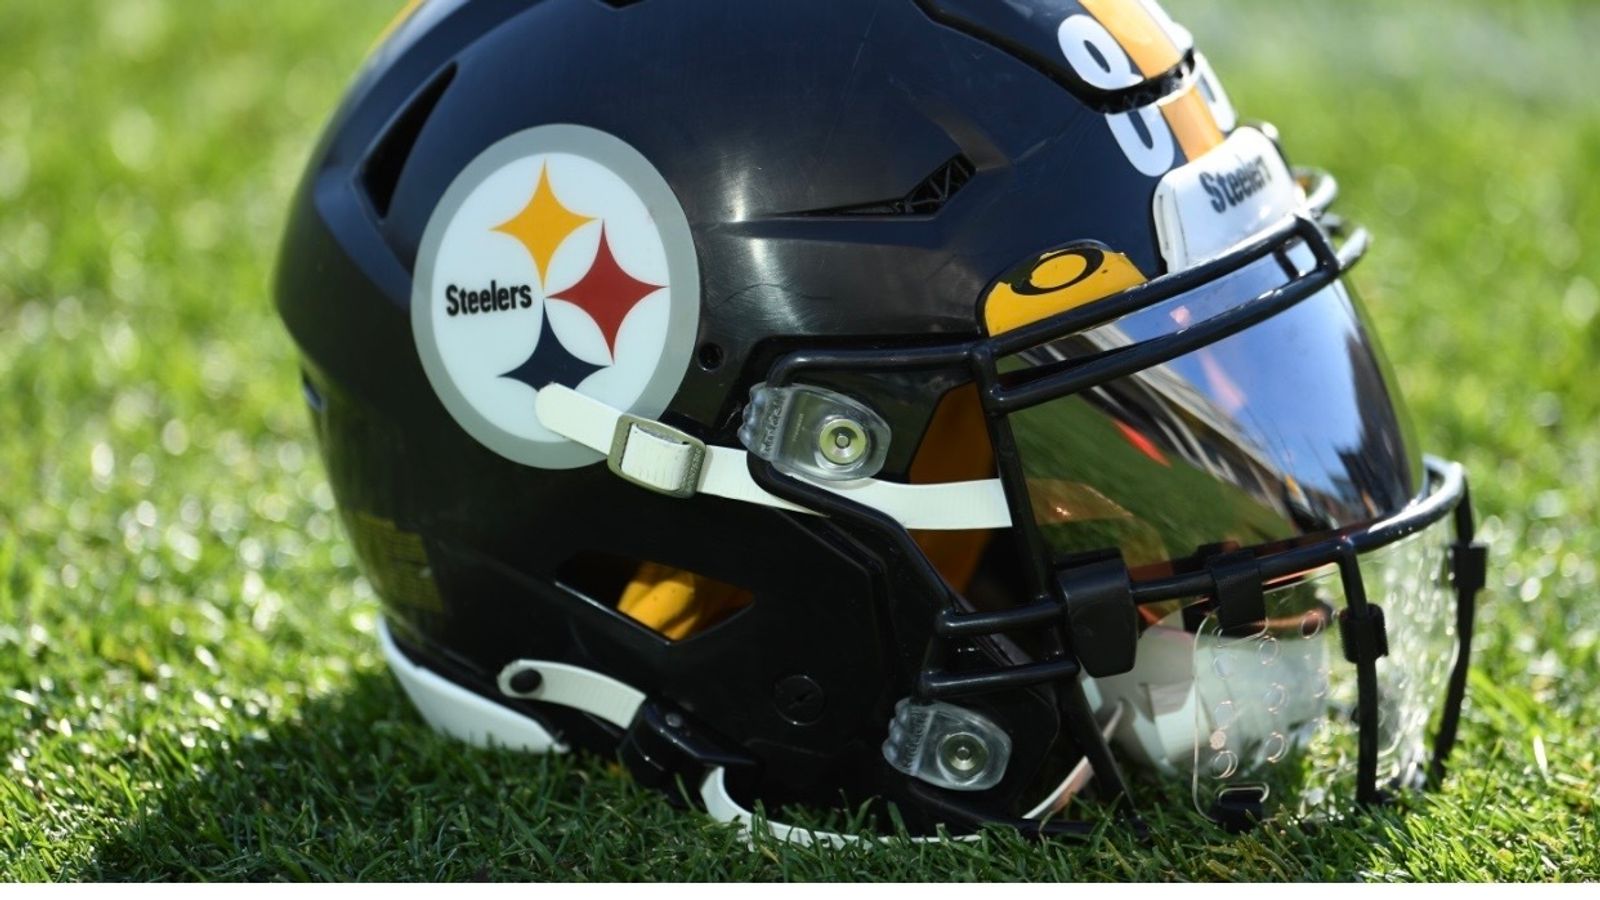 Steelers preseason schedule dates, times announced by NFL